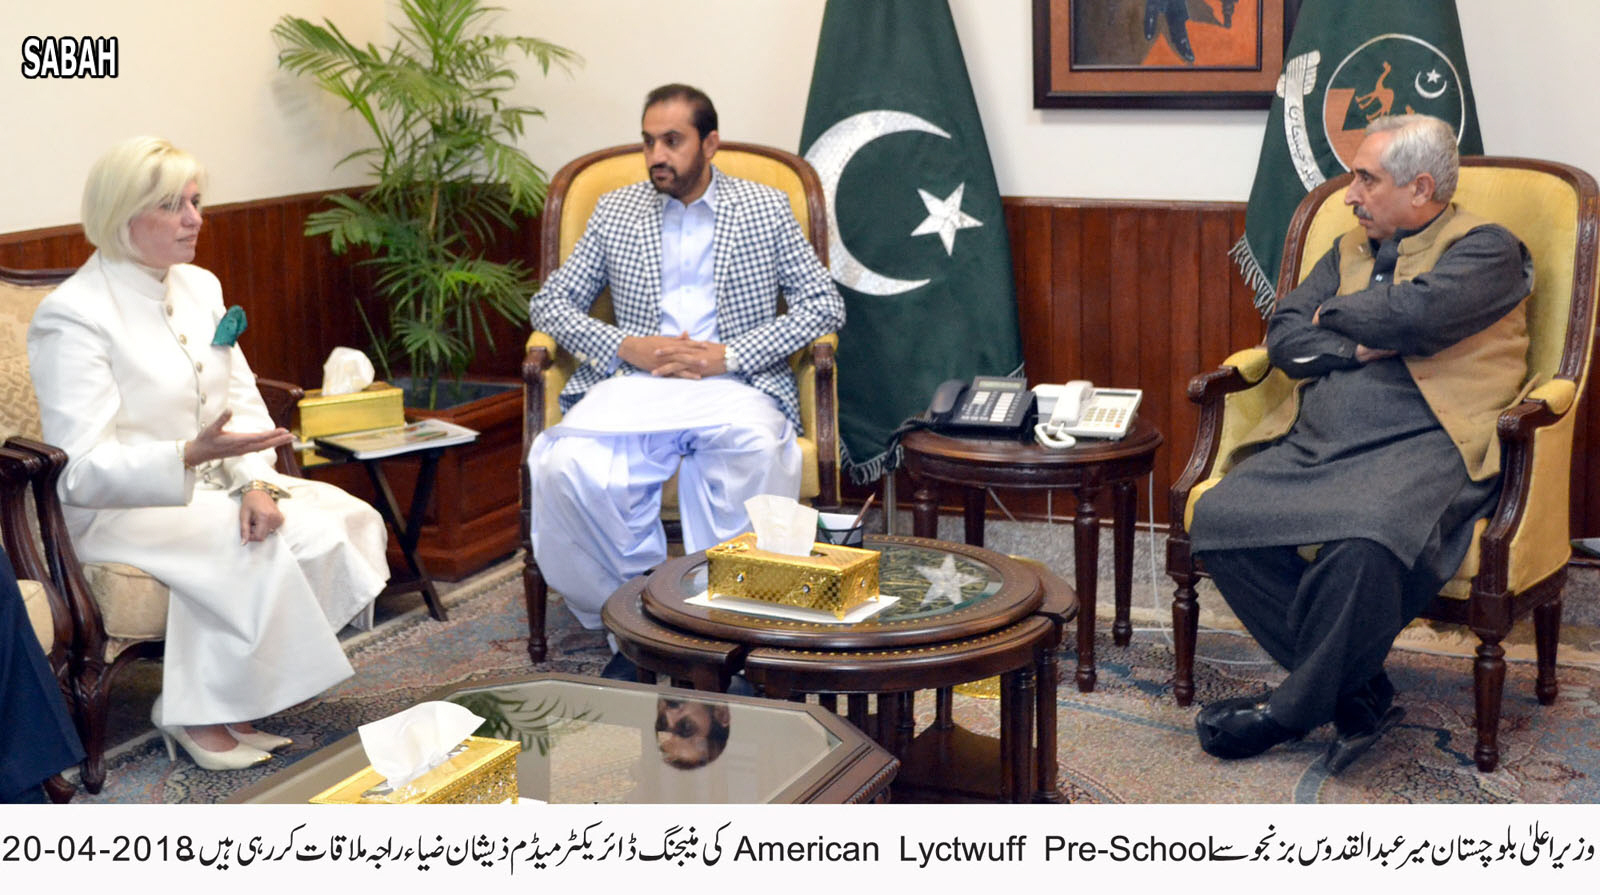 balochistan chief minister abdul quddus bizenjo in a meeting with american lycetuff chairperson zeeshan zia raja photo sabah